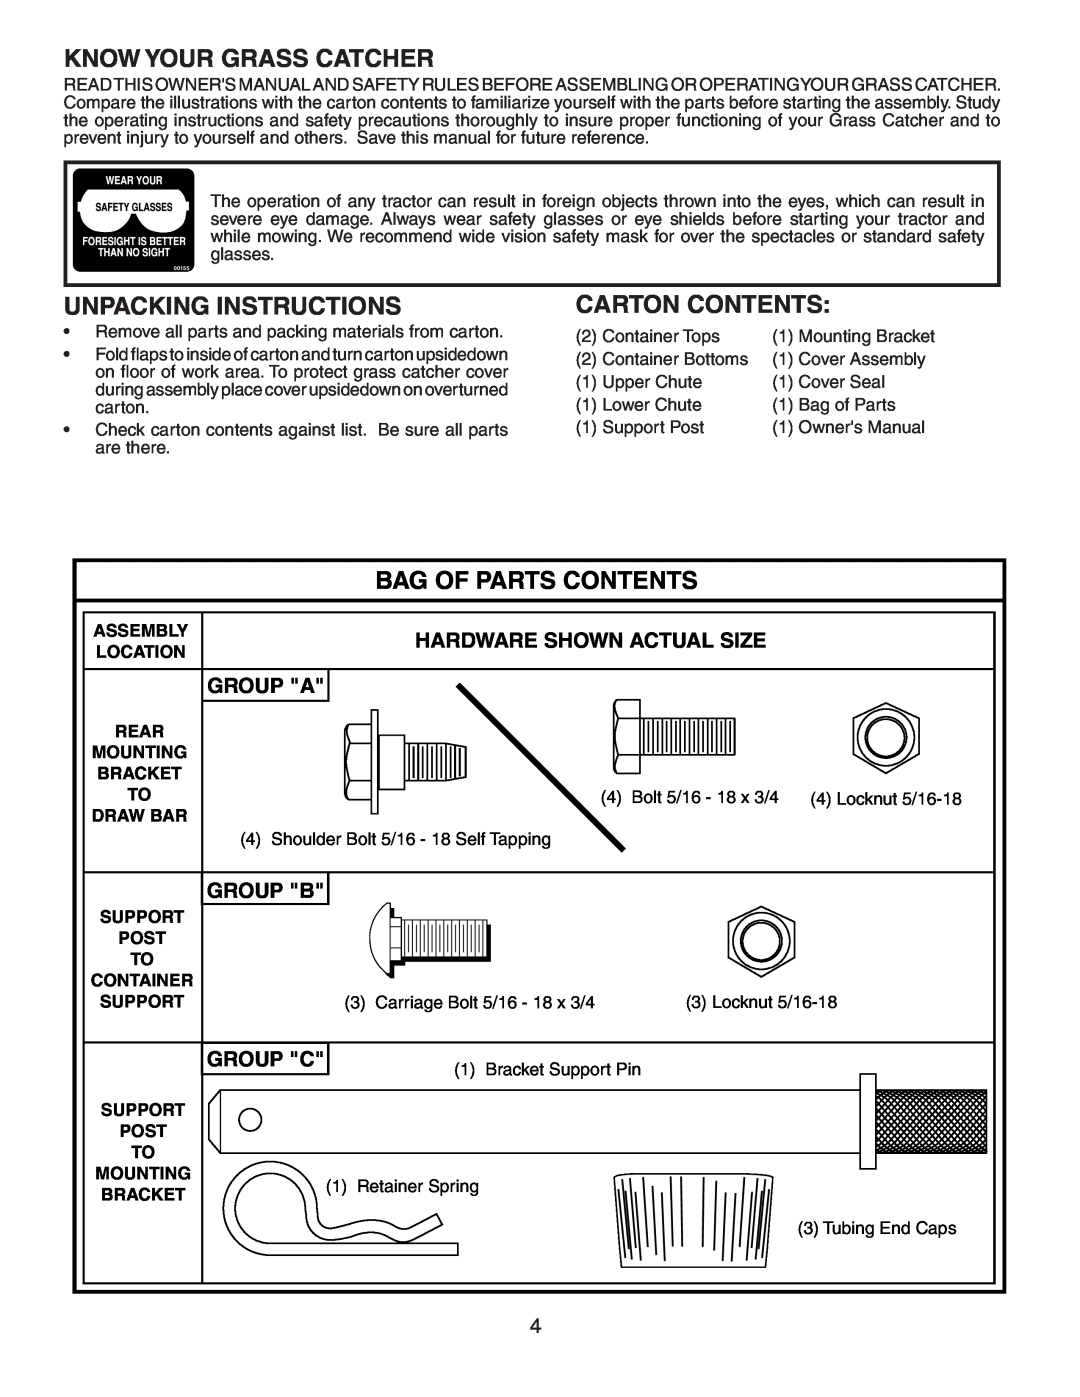 Poulan 532175732 Know Your Grass Catcher, Unpacking Instructions, Carton Contents, Bag Of Parts Contents, Group A, Group B 